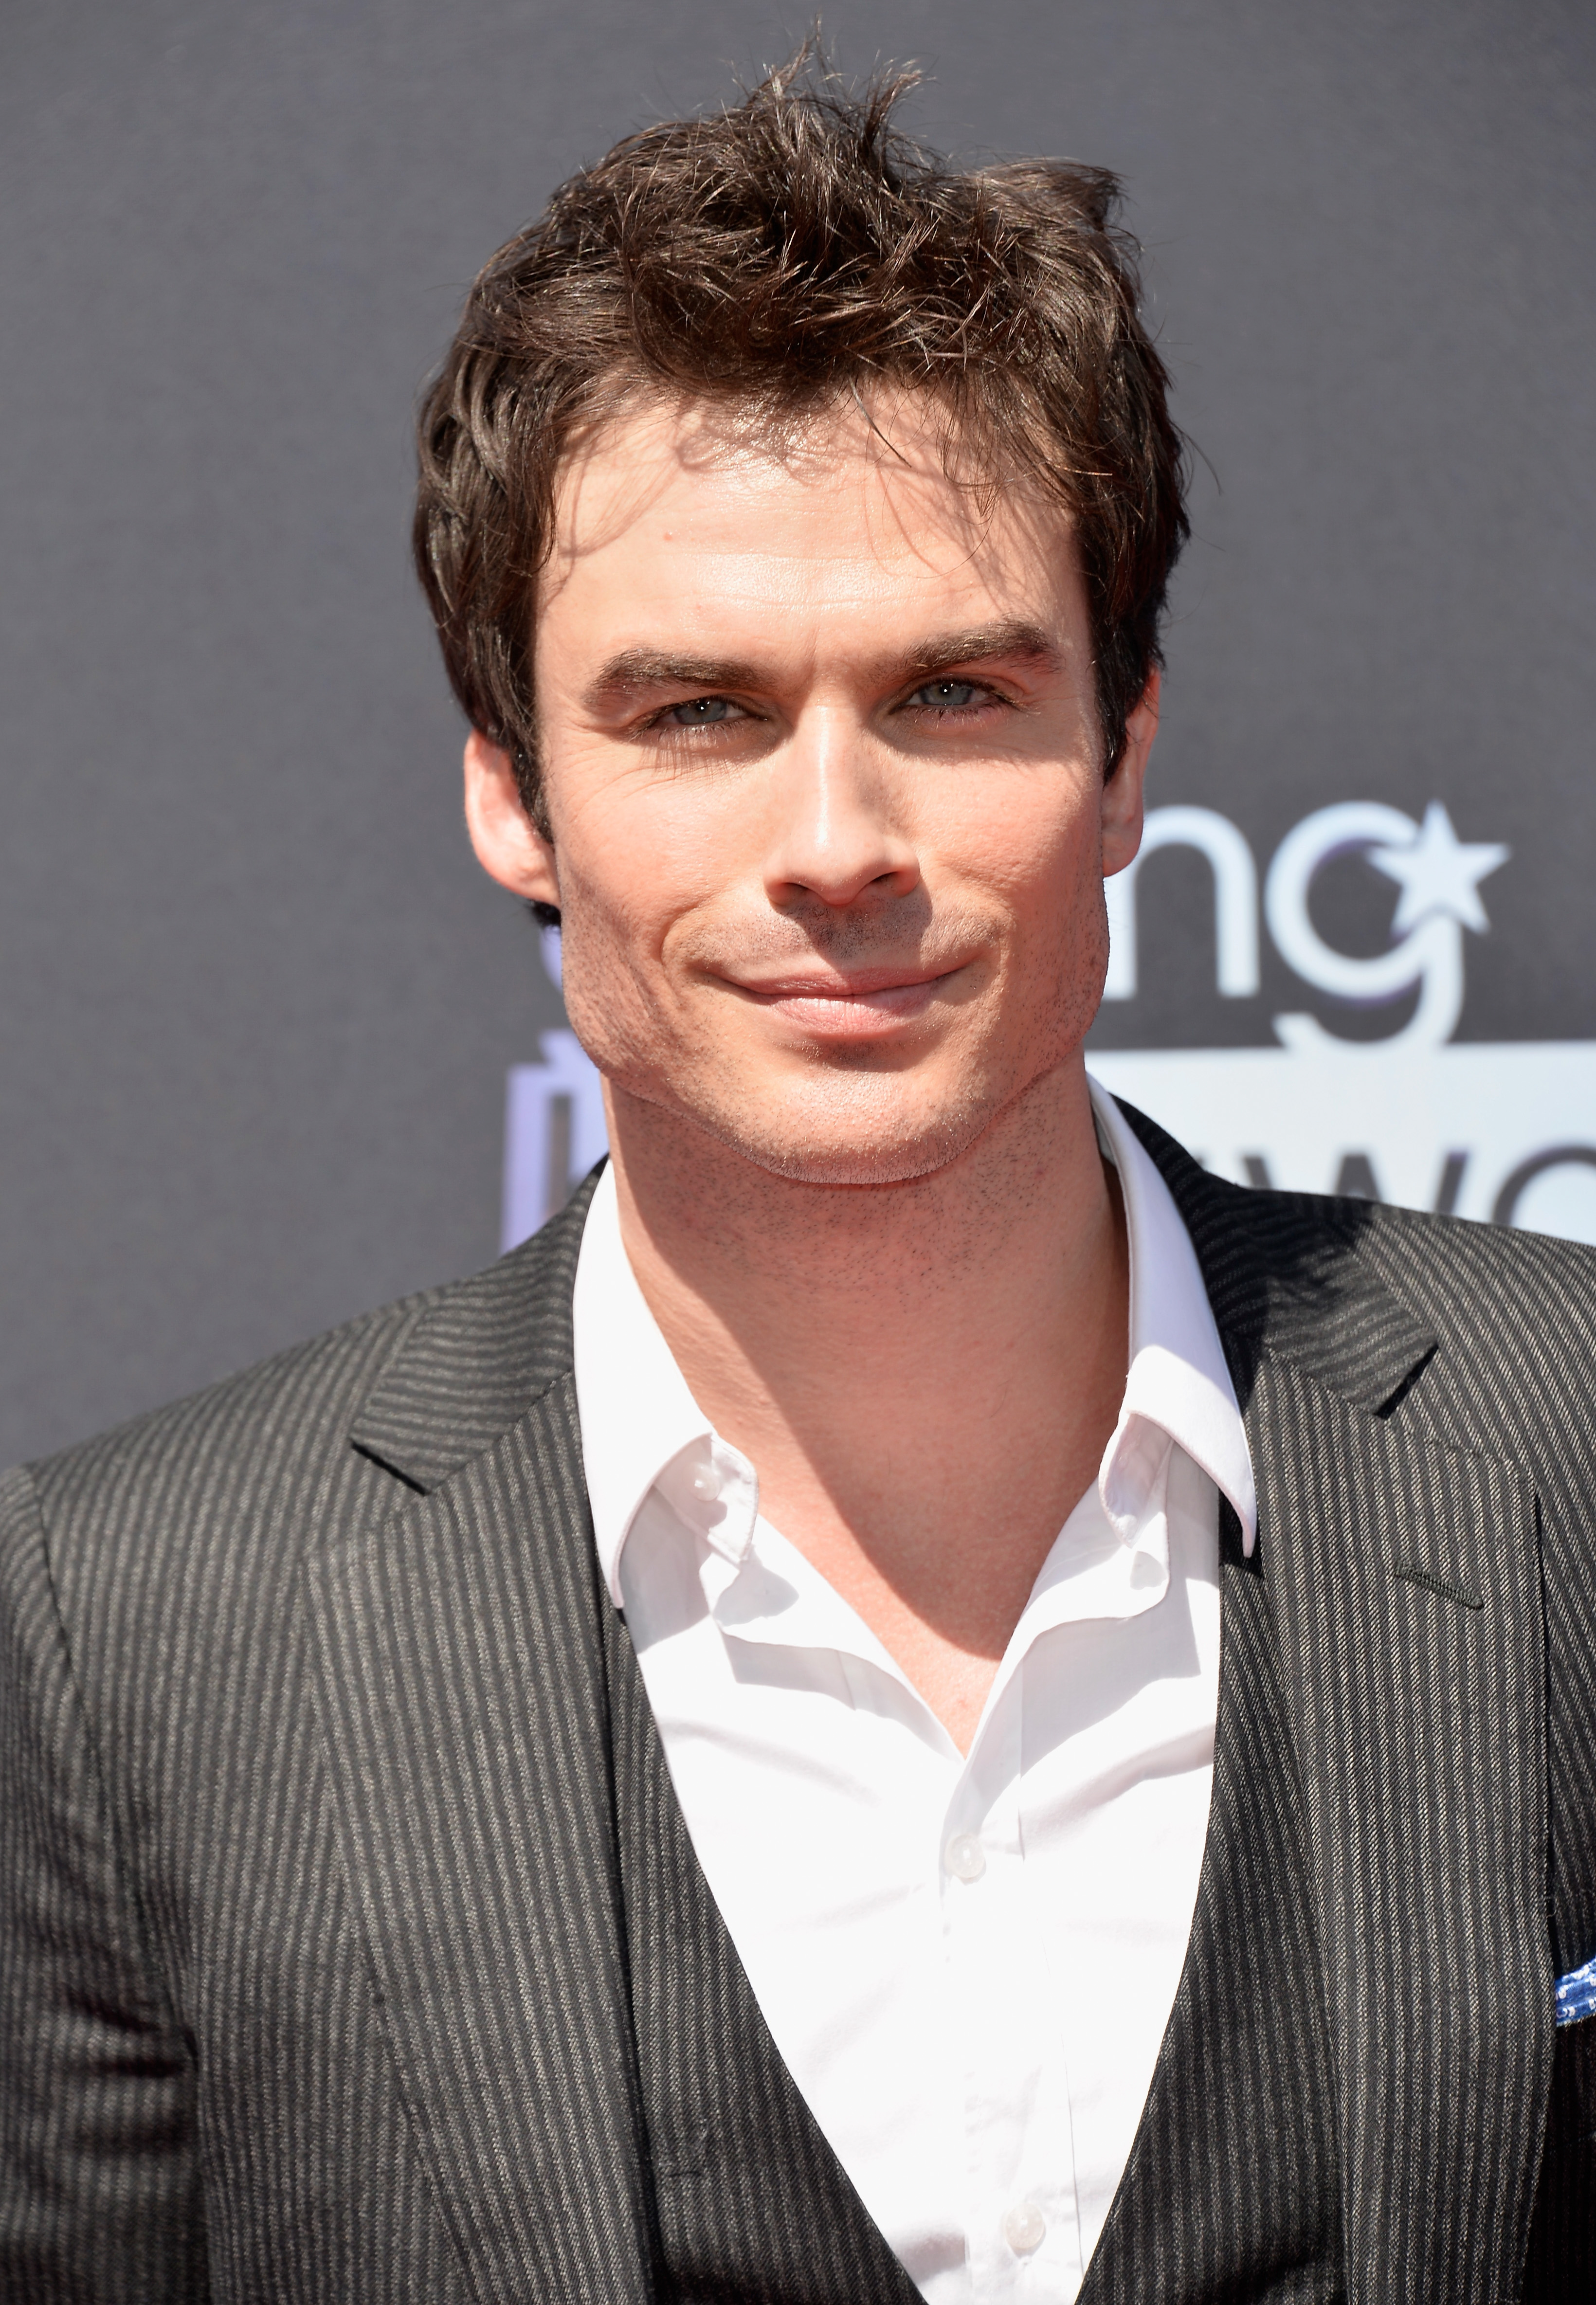 SANTA MONICA, CA - AUGUST 01: Actor Ian Somerhalder attends CW Network's 2013 Young Hollywood Awards presented by Crest 3D White and SodaStream held at The Broad Stage on August 1, 2013 in Santa Monica, California. (Photo by Frazer Harrison/Getty Images)